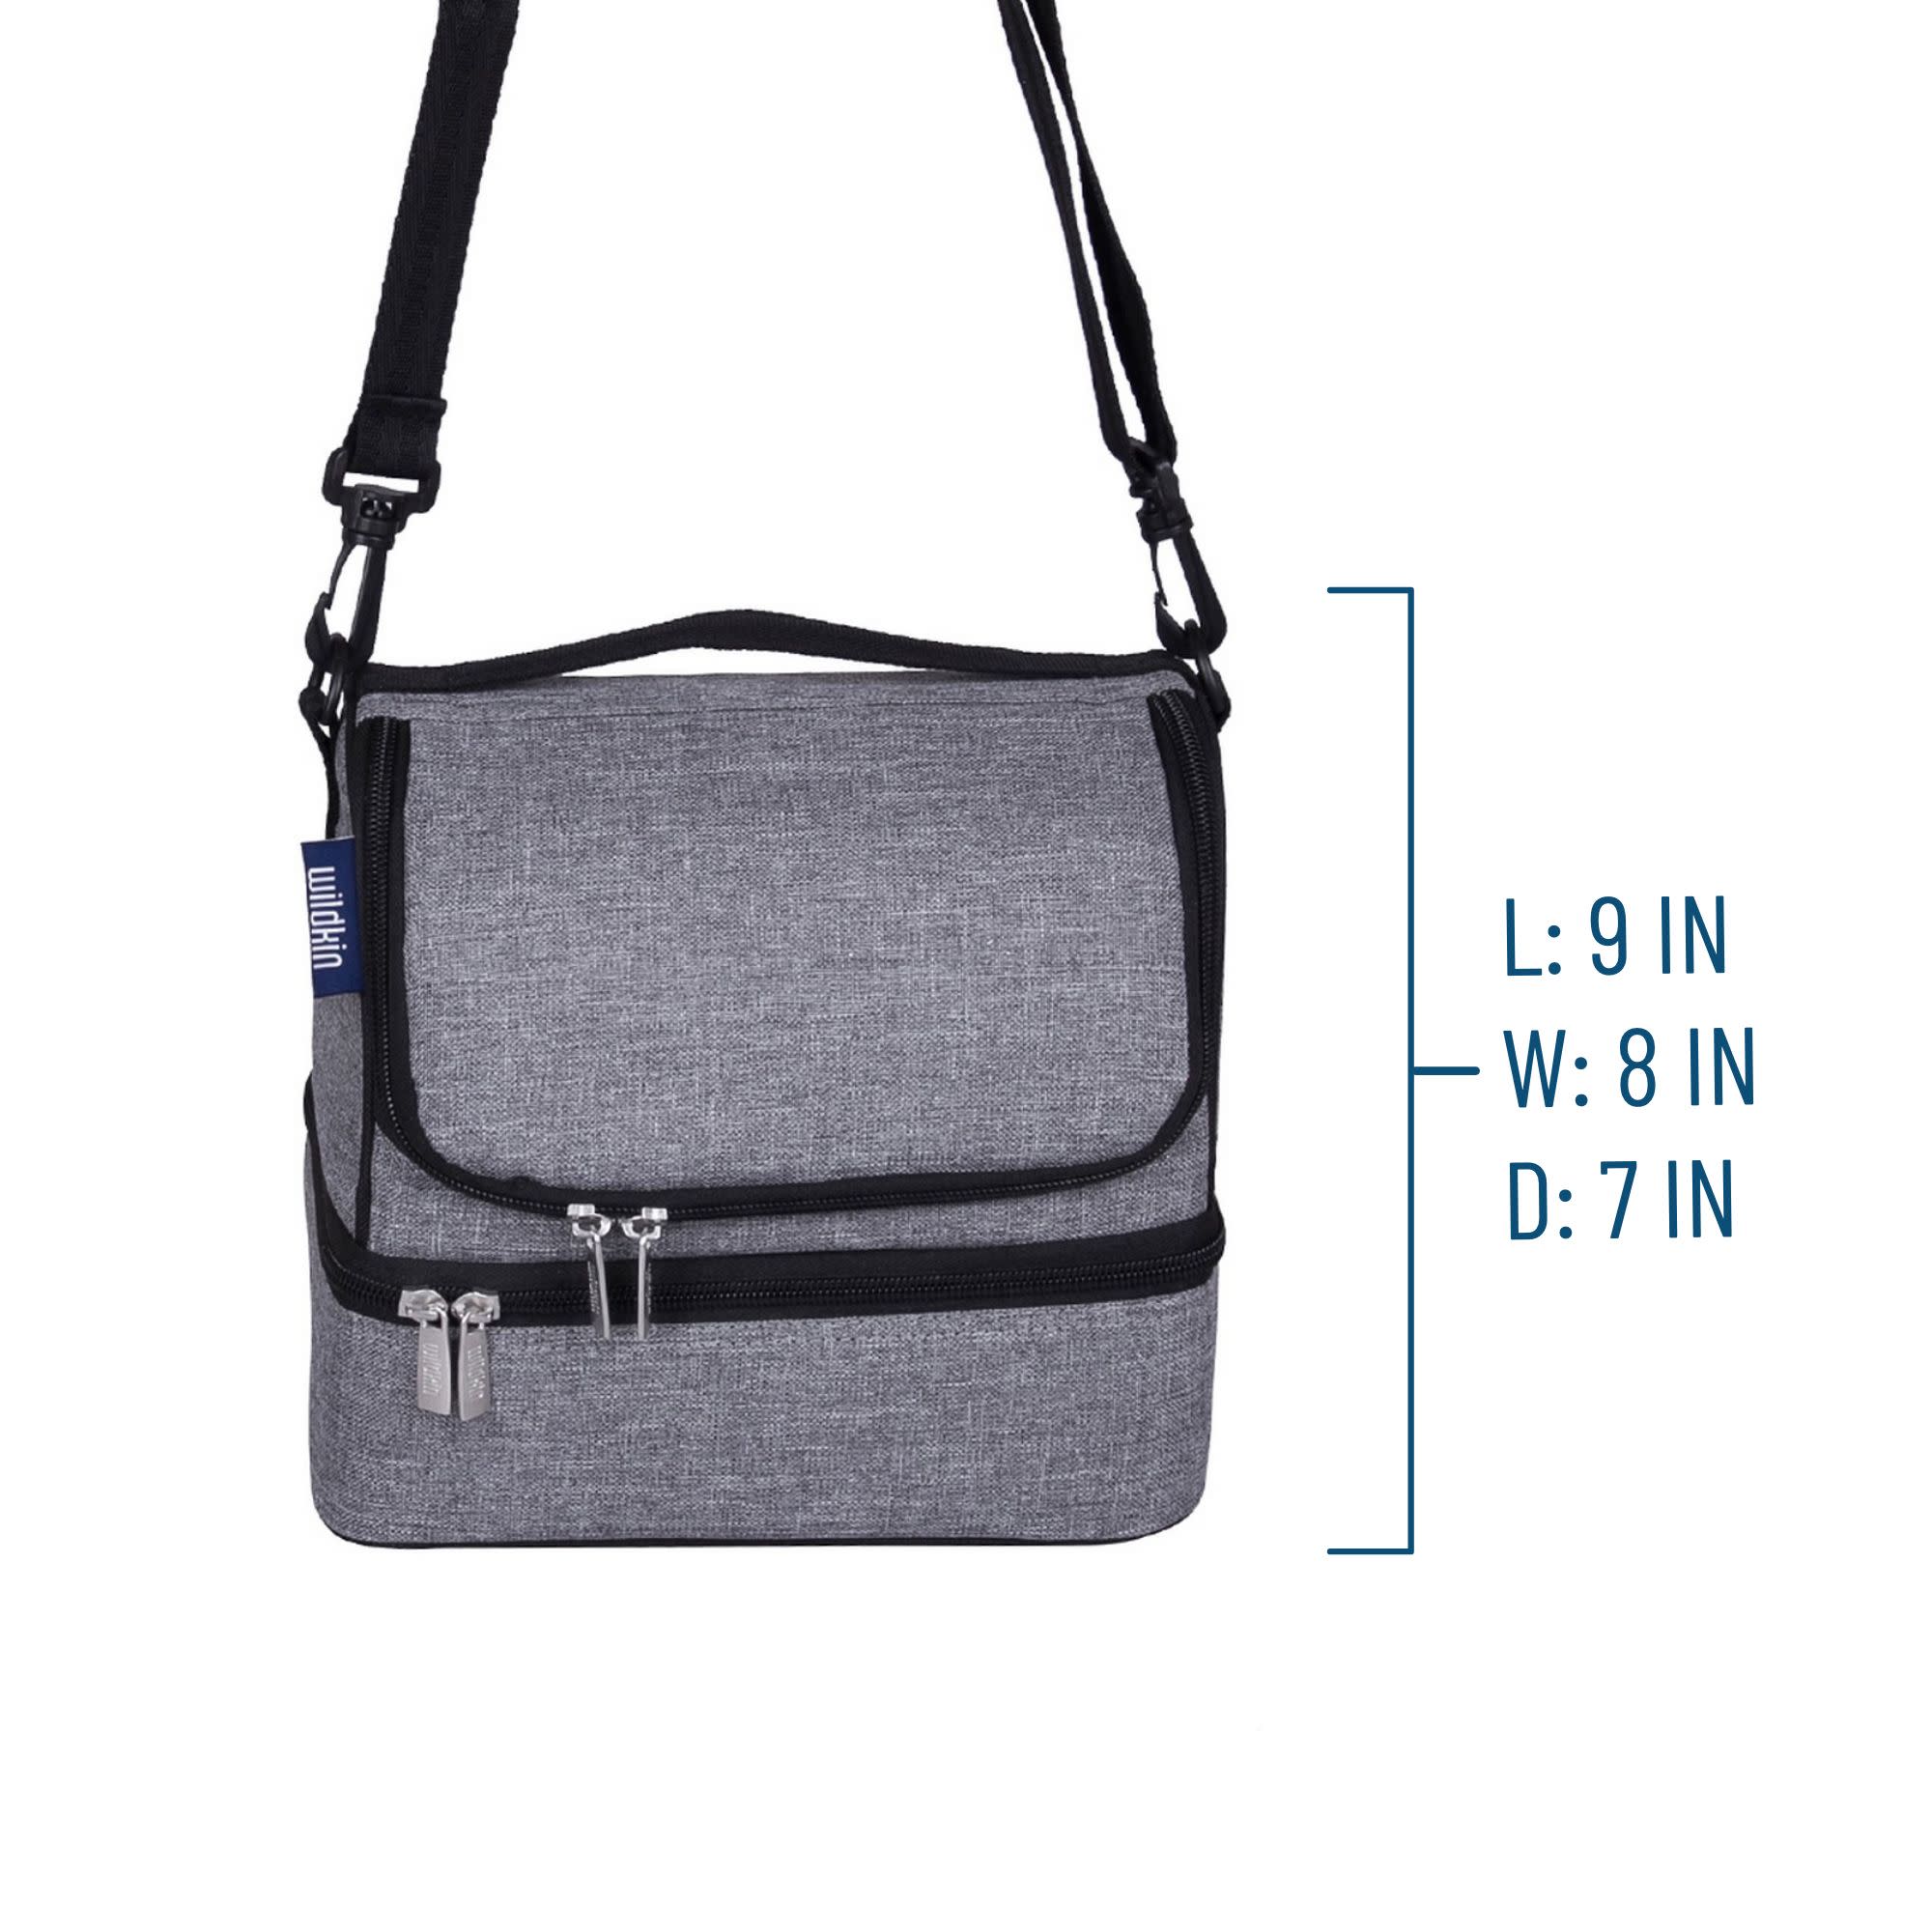 Wildkin Gray Tweed Two Compartment Lunch Bag Grey